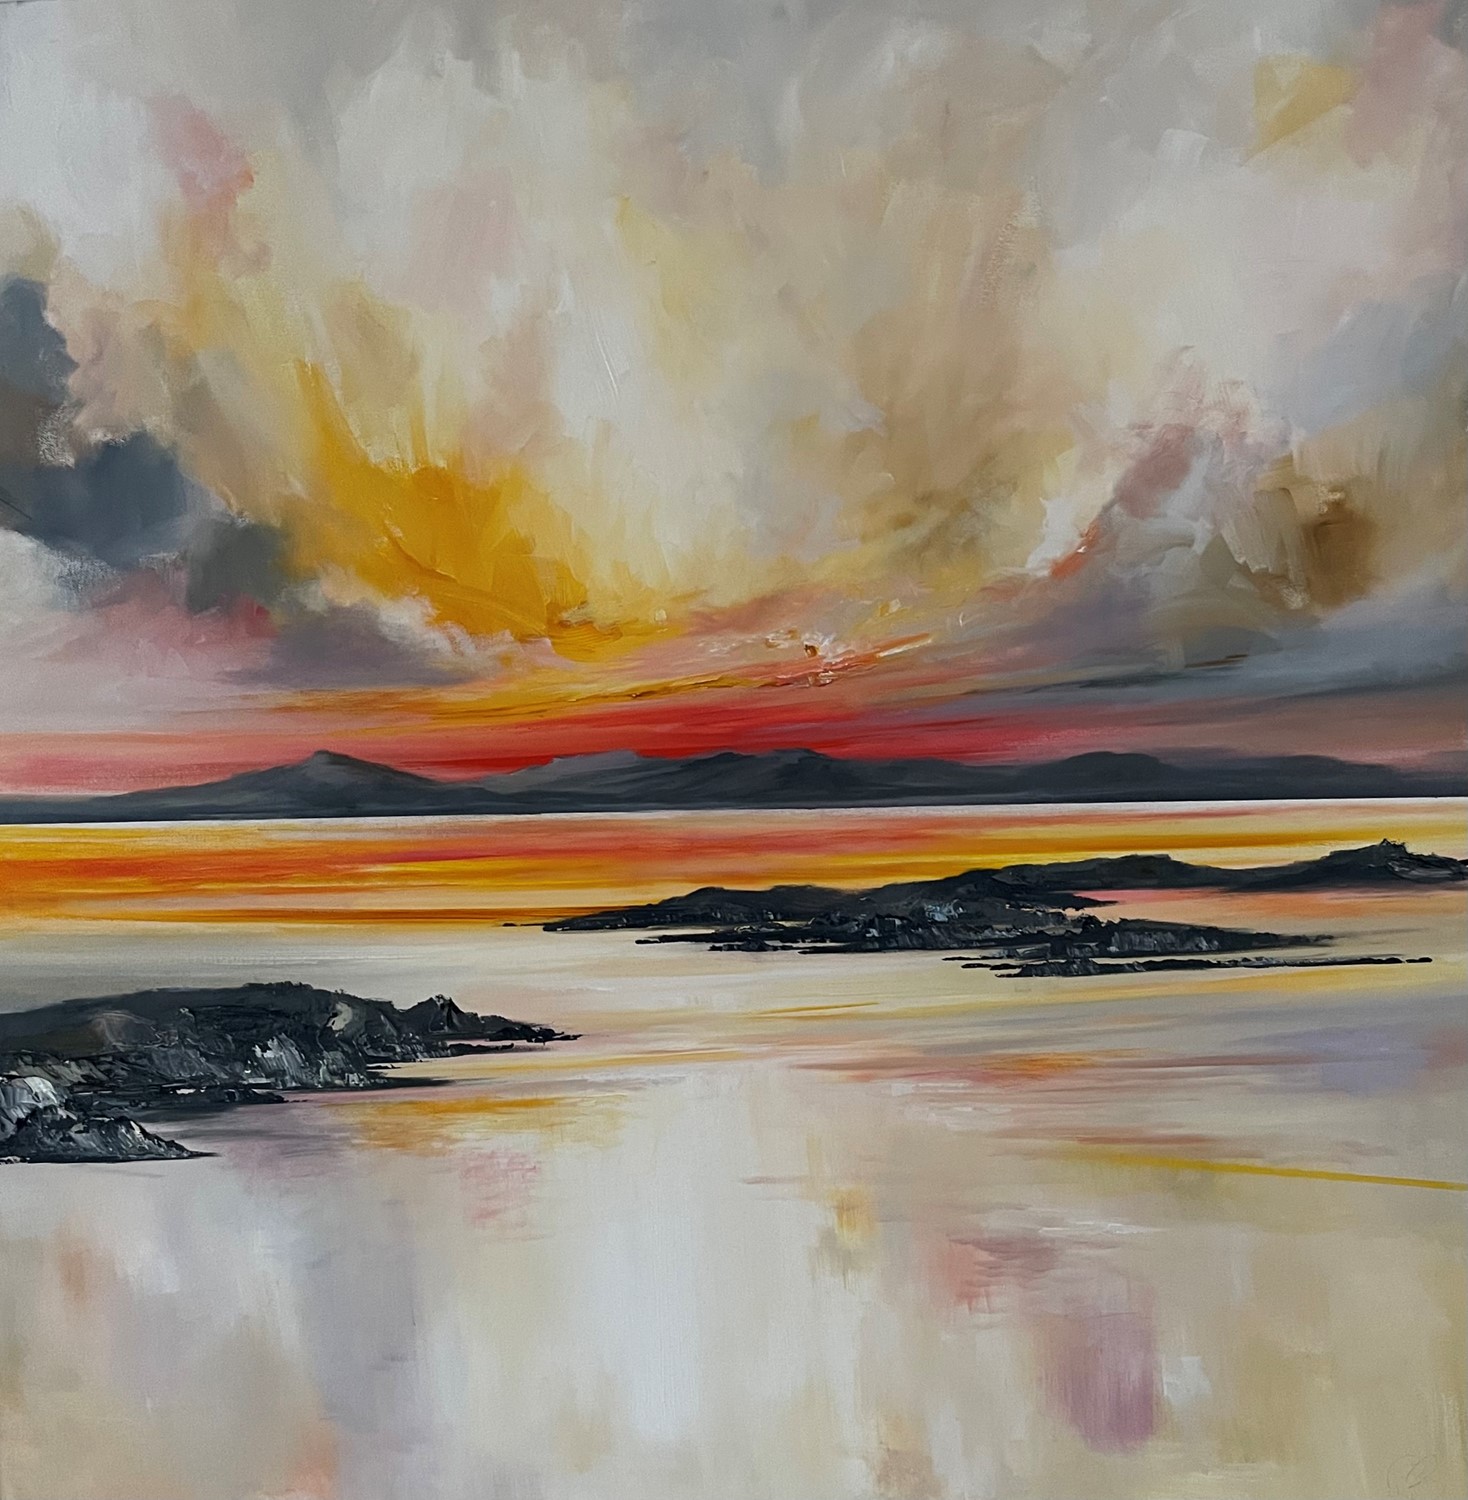 'Red sky at night ' by artist Rosanne Barr